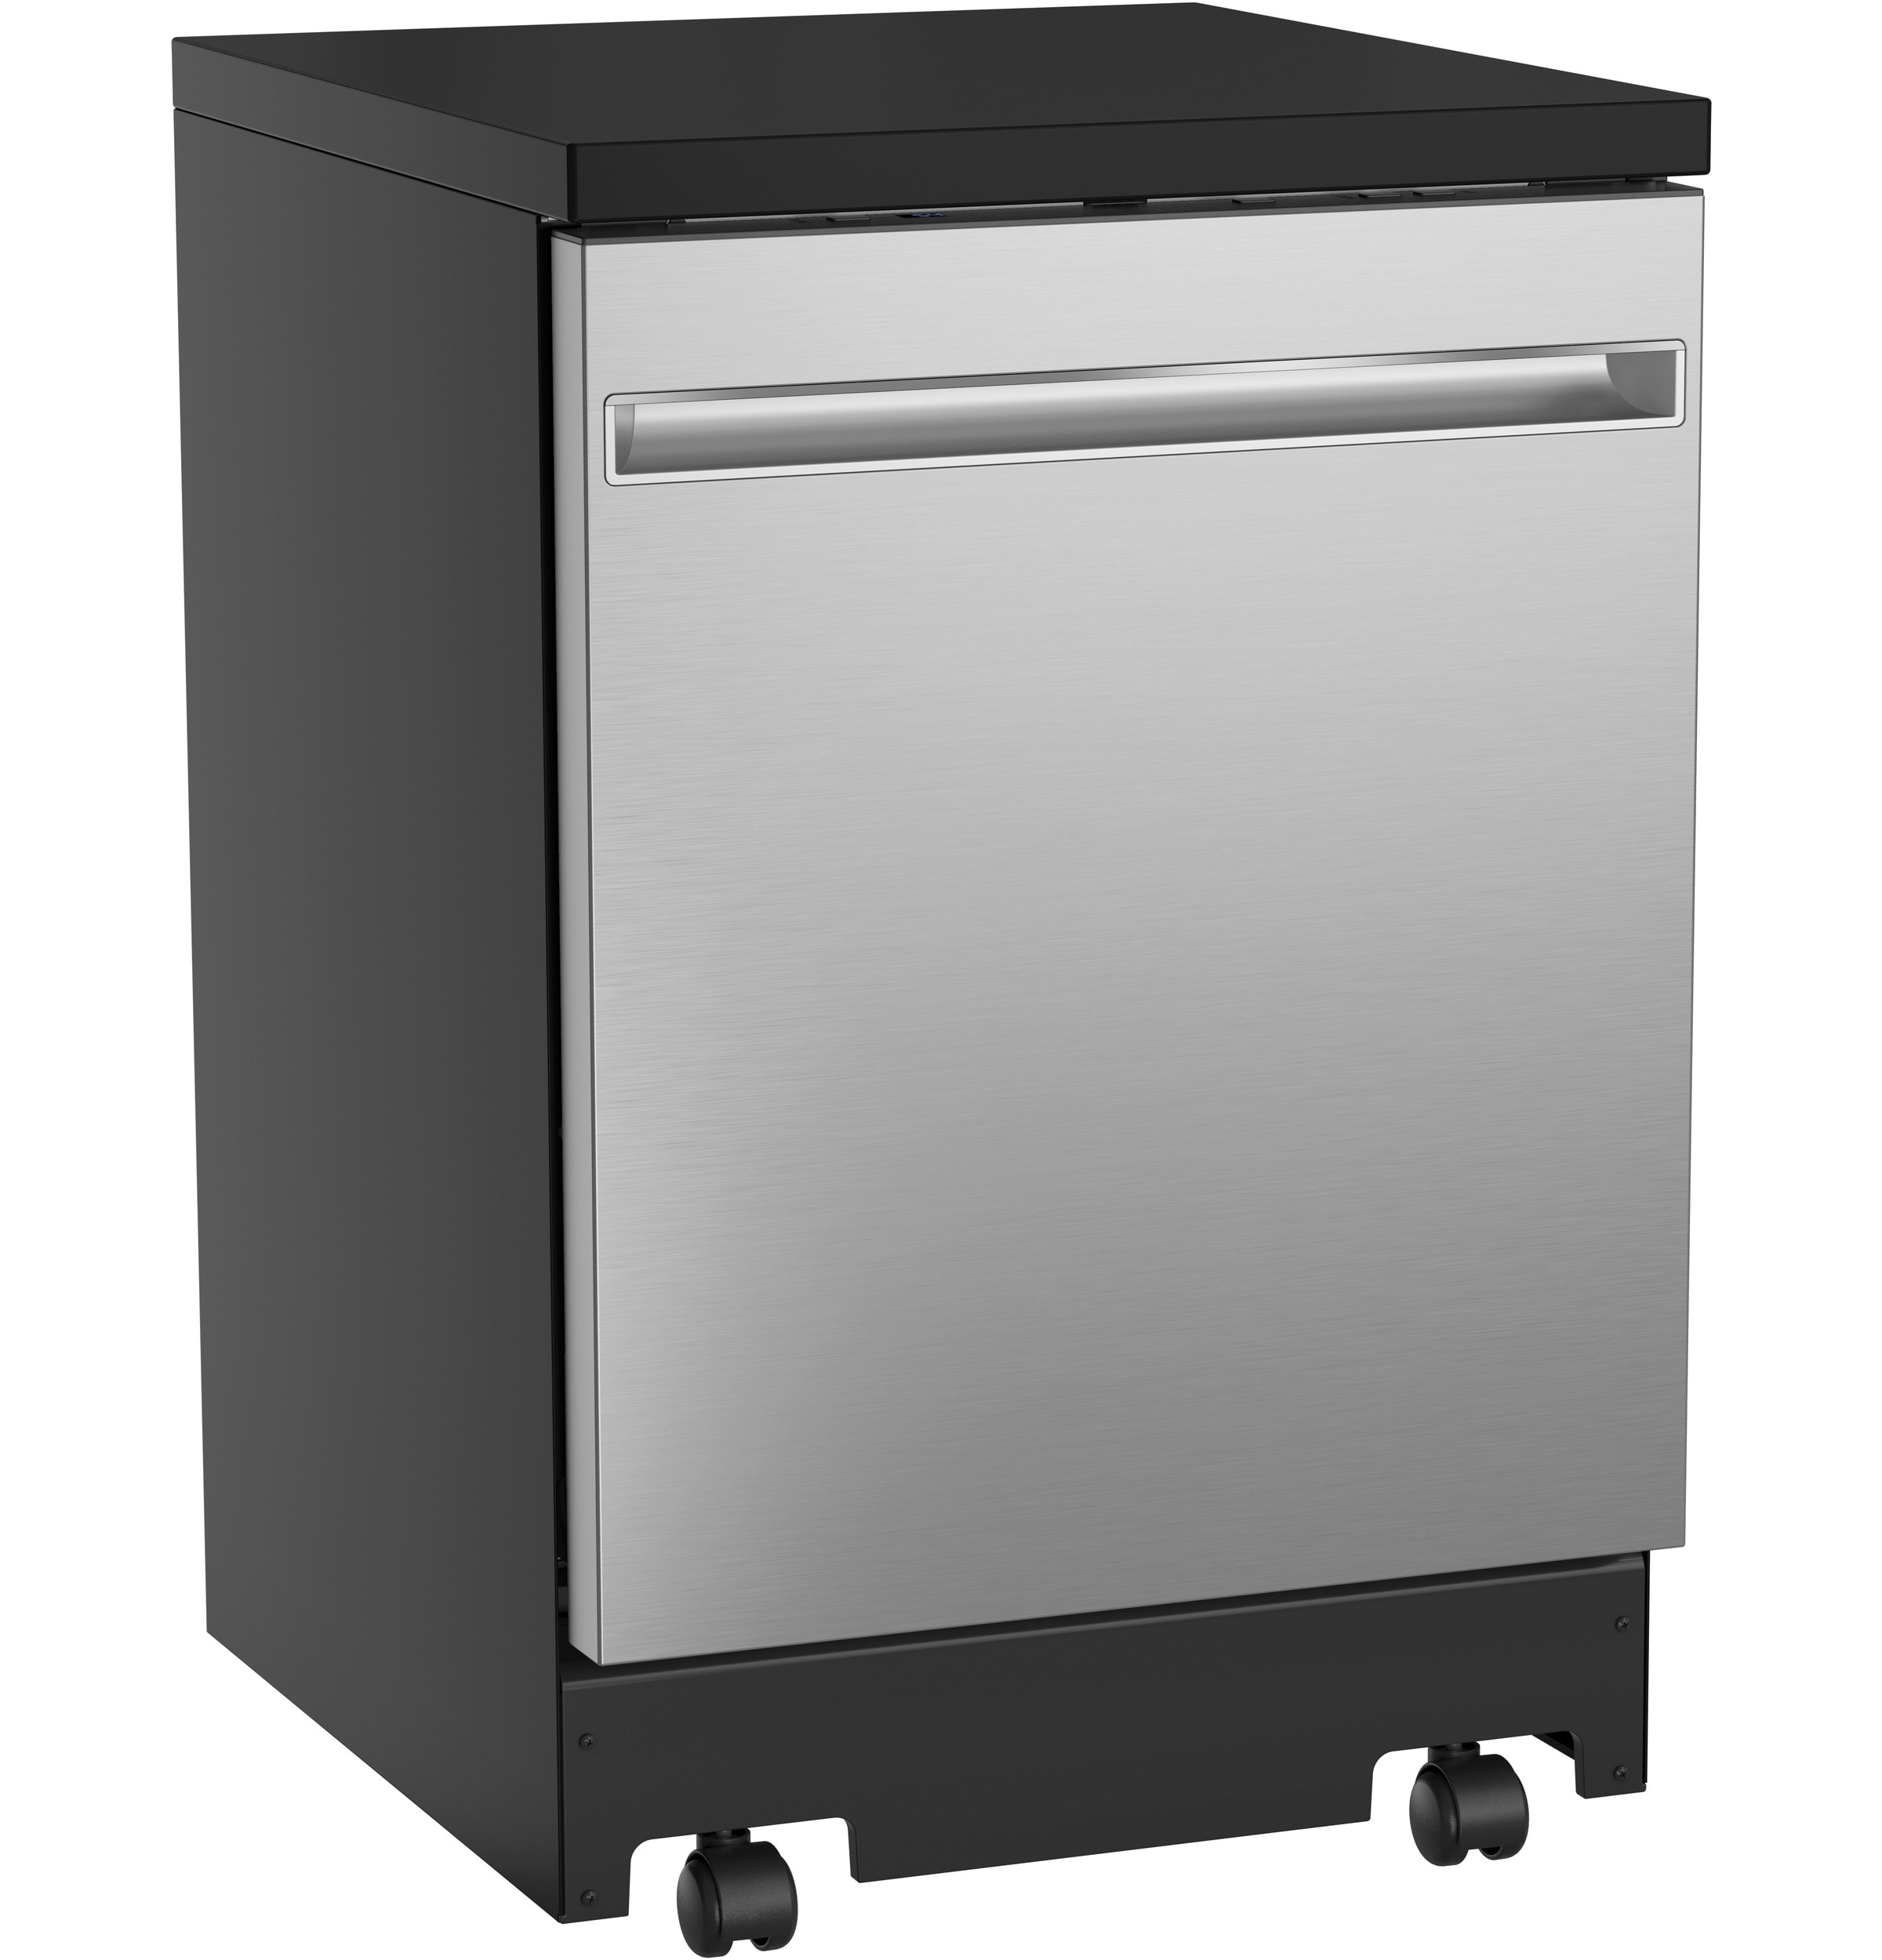 Free Standing Dishwashers For Sale, Cheap Dishwasher Freestanding Sale